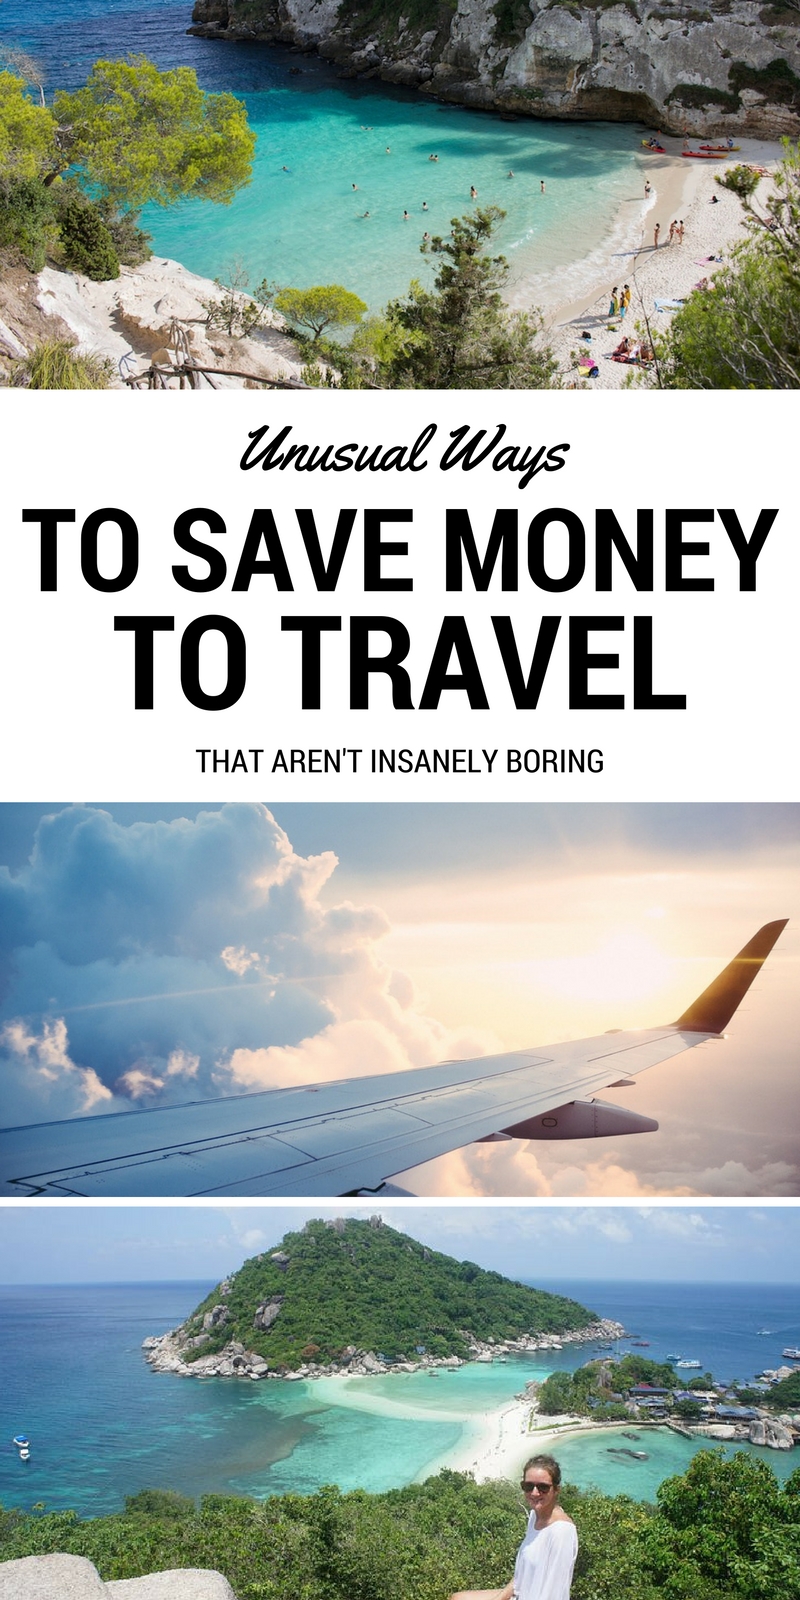 Unusual ways to save money to travel that aren't insanely boring